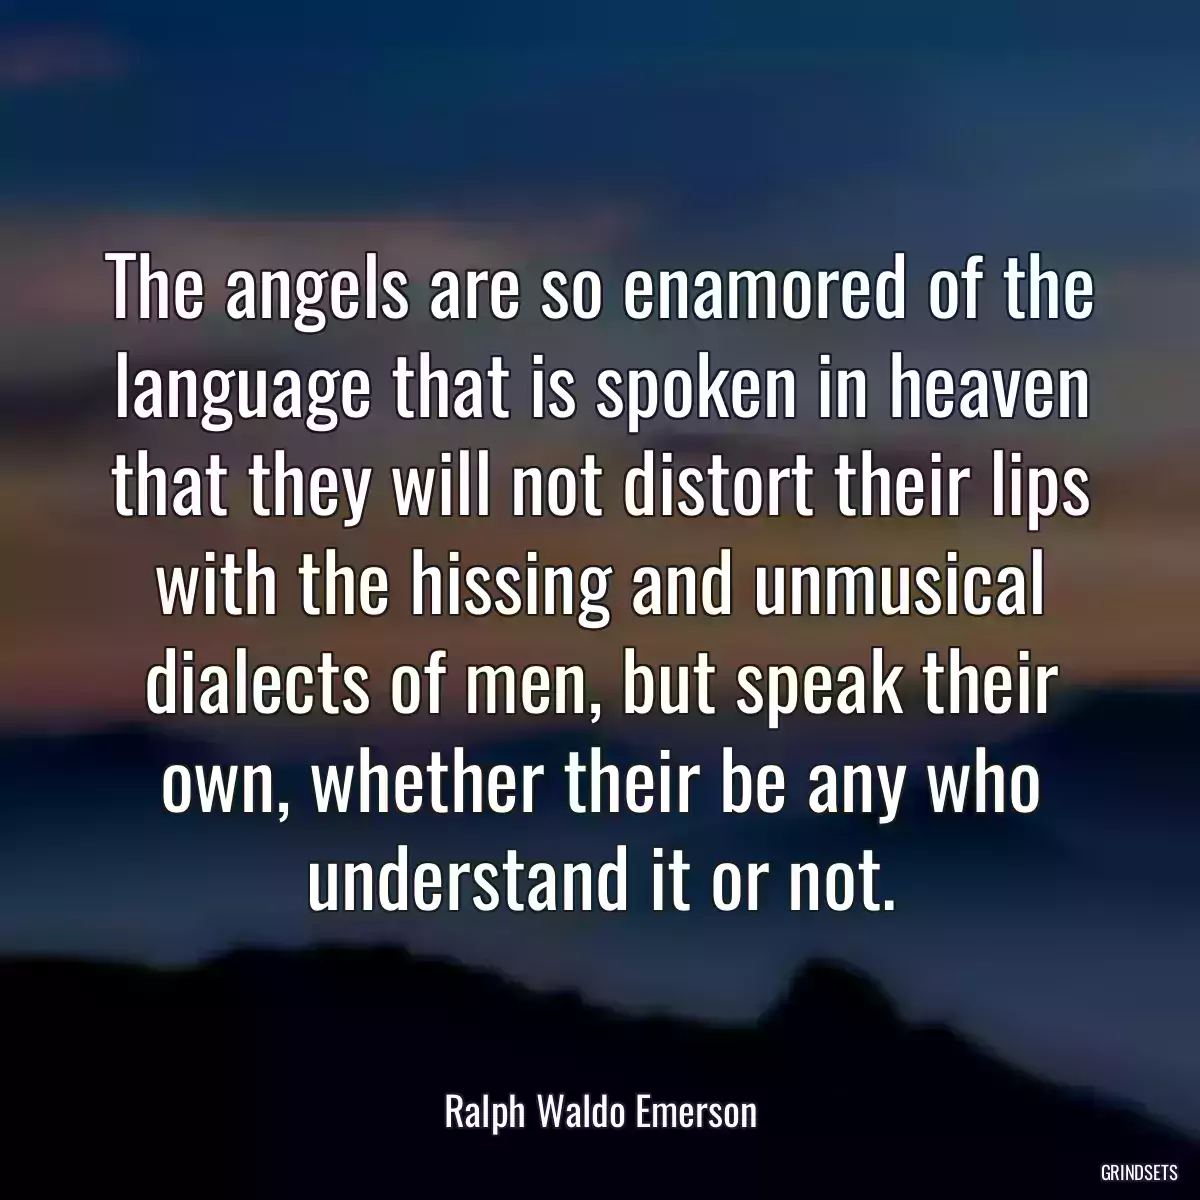 The angels are so enamored of the language that is spoken in heaven that they will not distort their lips with the hissing and unmusical dialects of men, but speak their own, whether their be any who understand it or not.